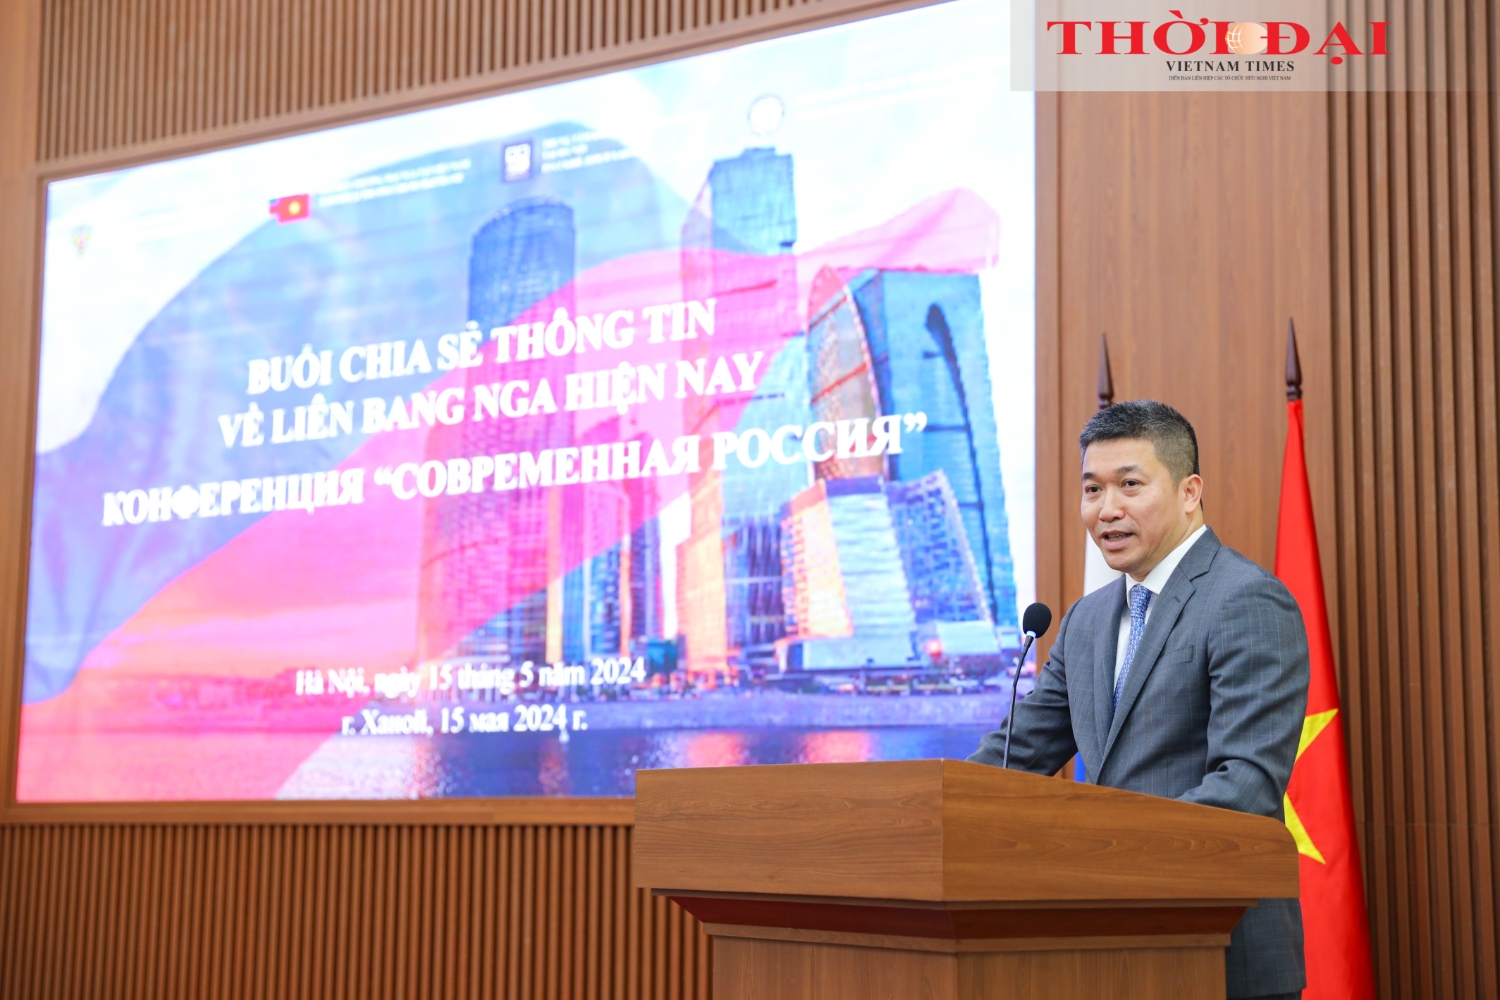 President of the Viet Nam Union of Friendship Organizations Phan Anh Son spoke at the conference (Photo: Dinh Hoa)